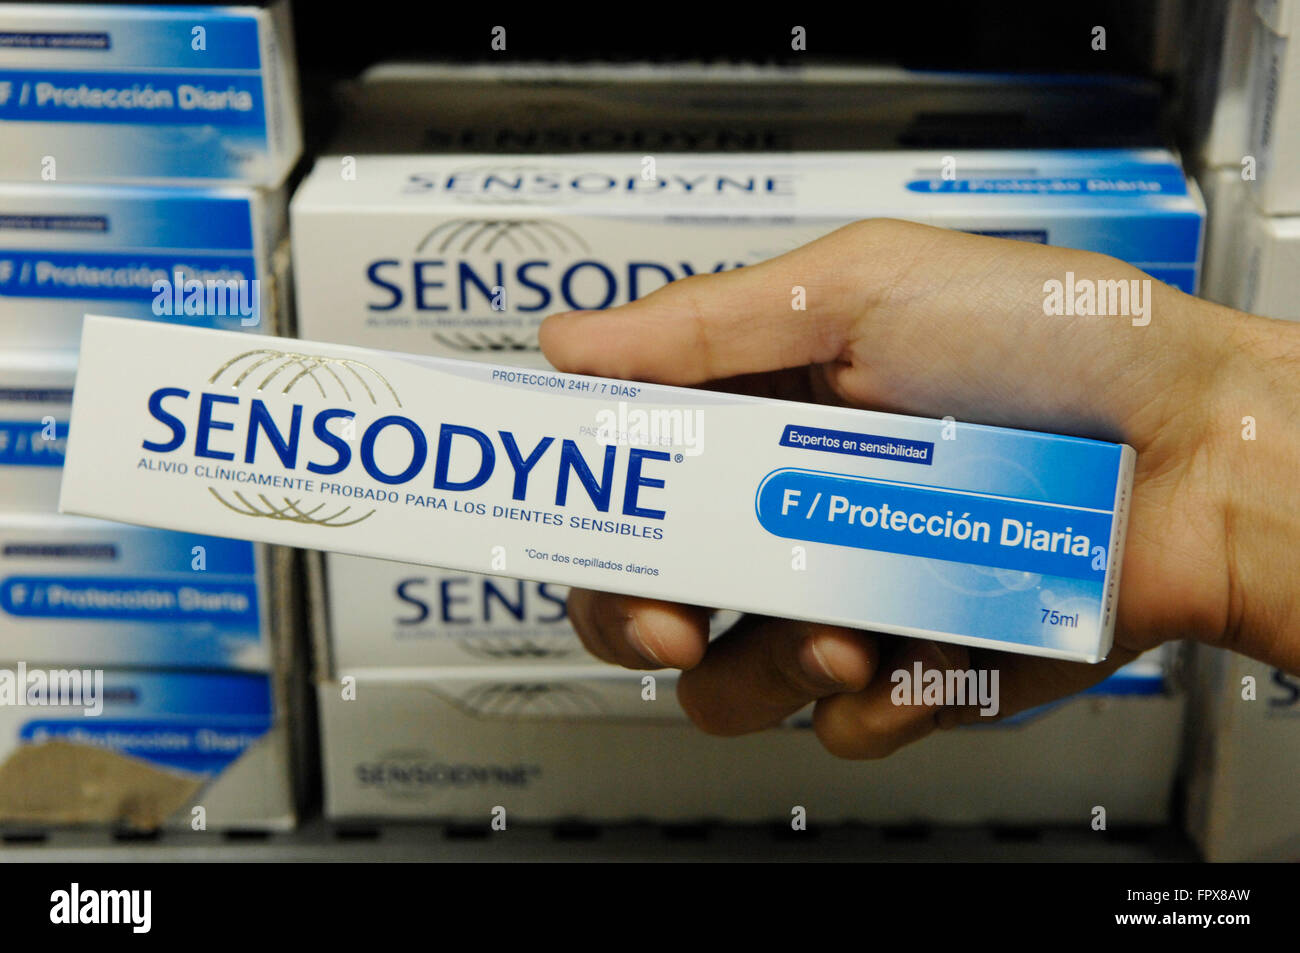 Sensodyne Toothpaste on sale in a Carrefour Supermarket in Malaga Spain. Stock Photo